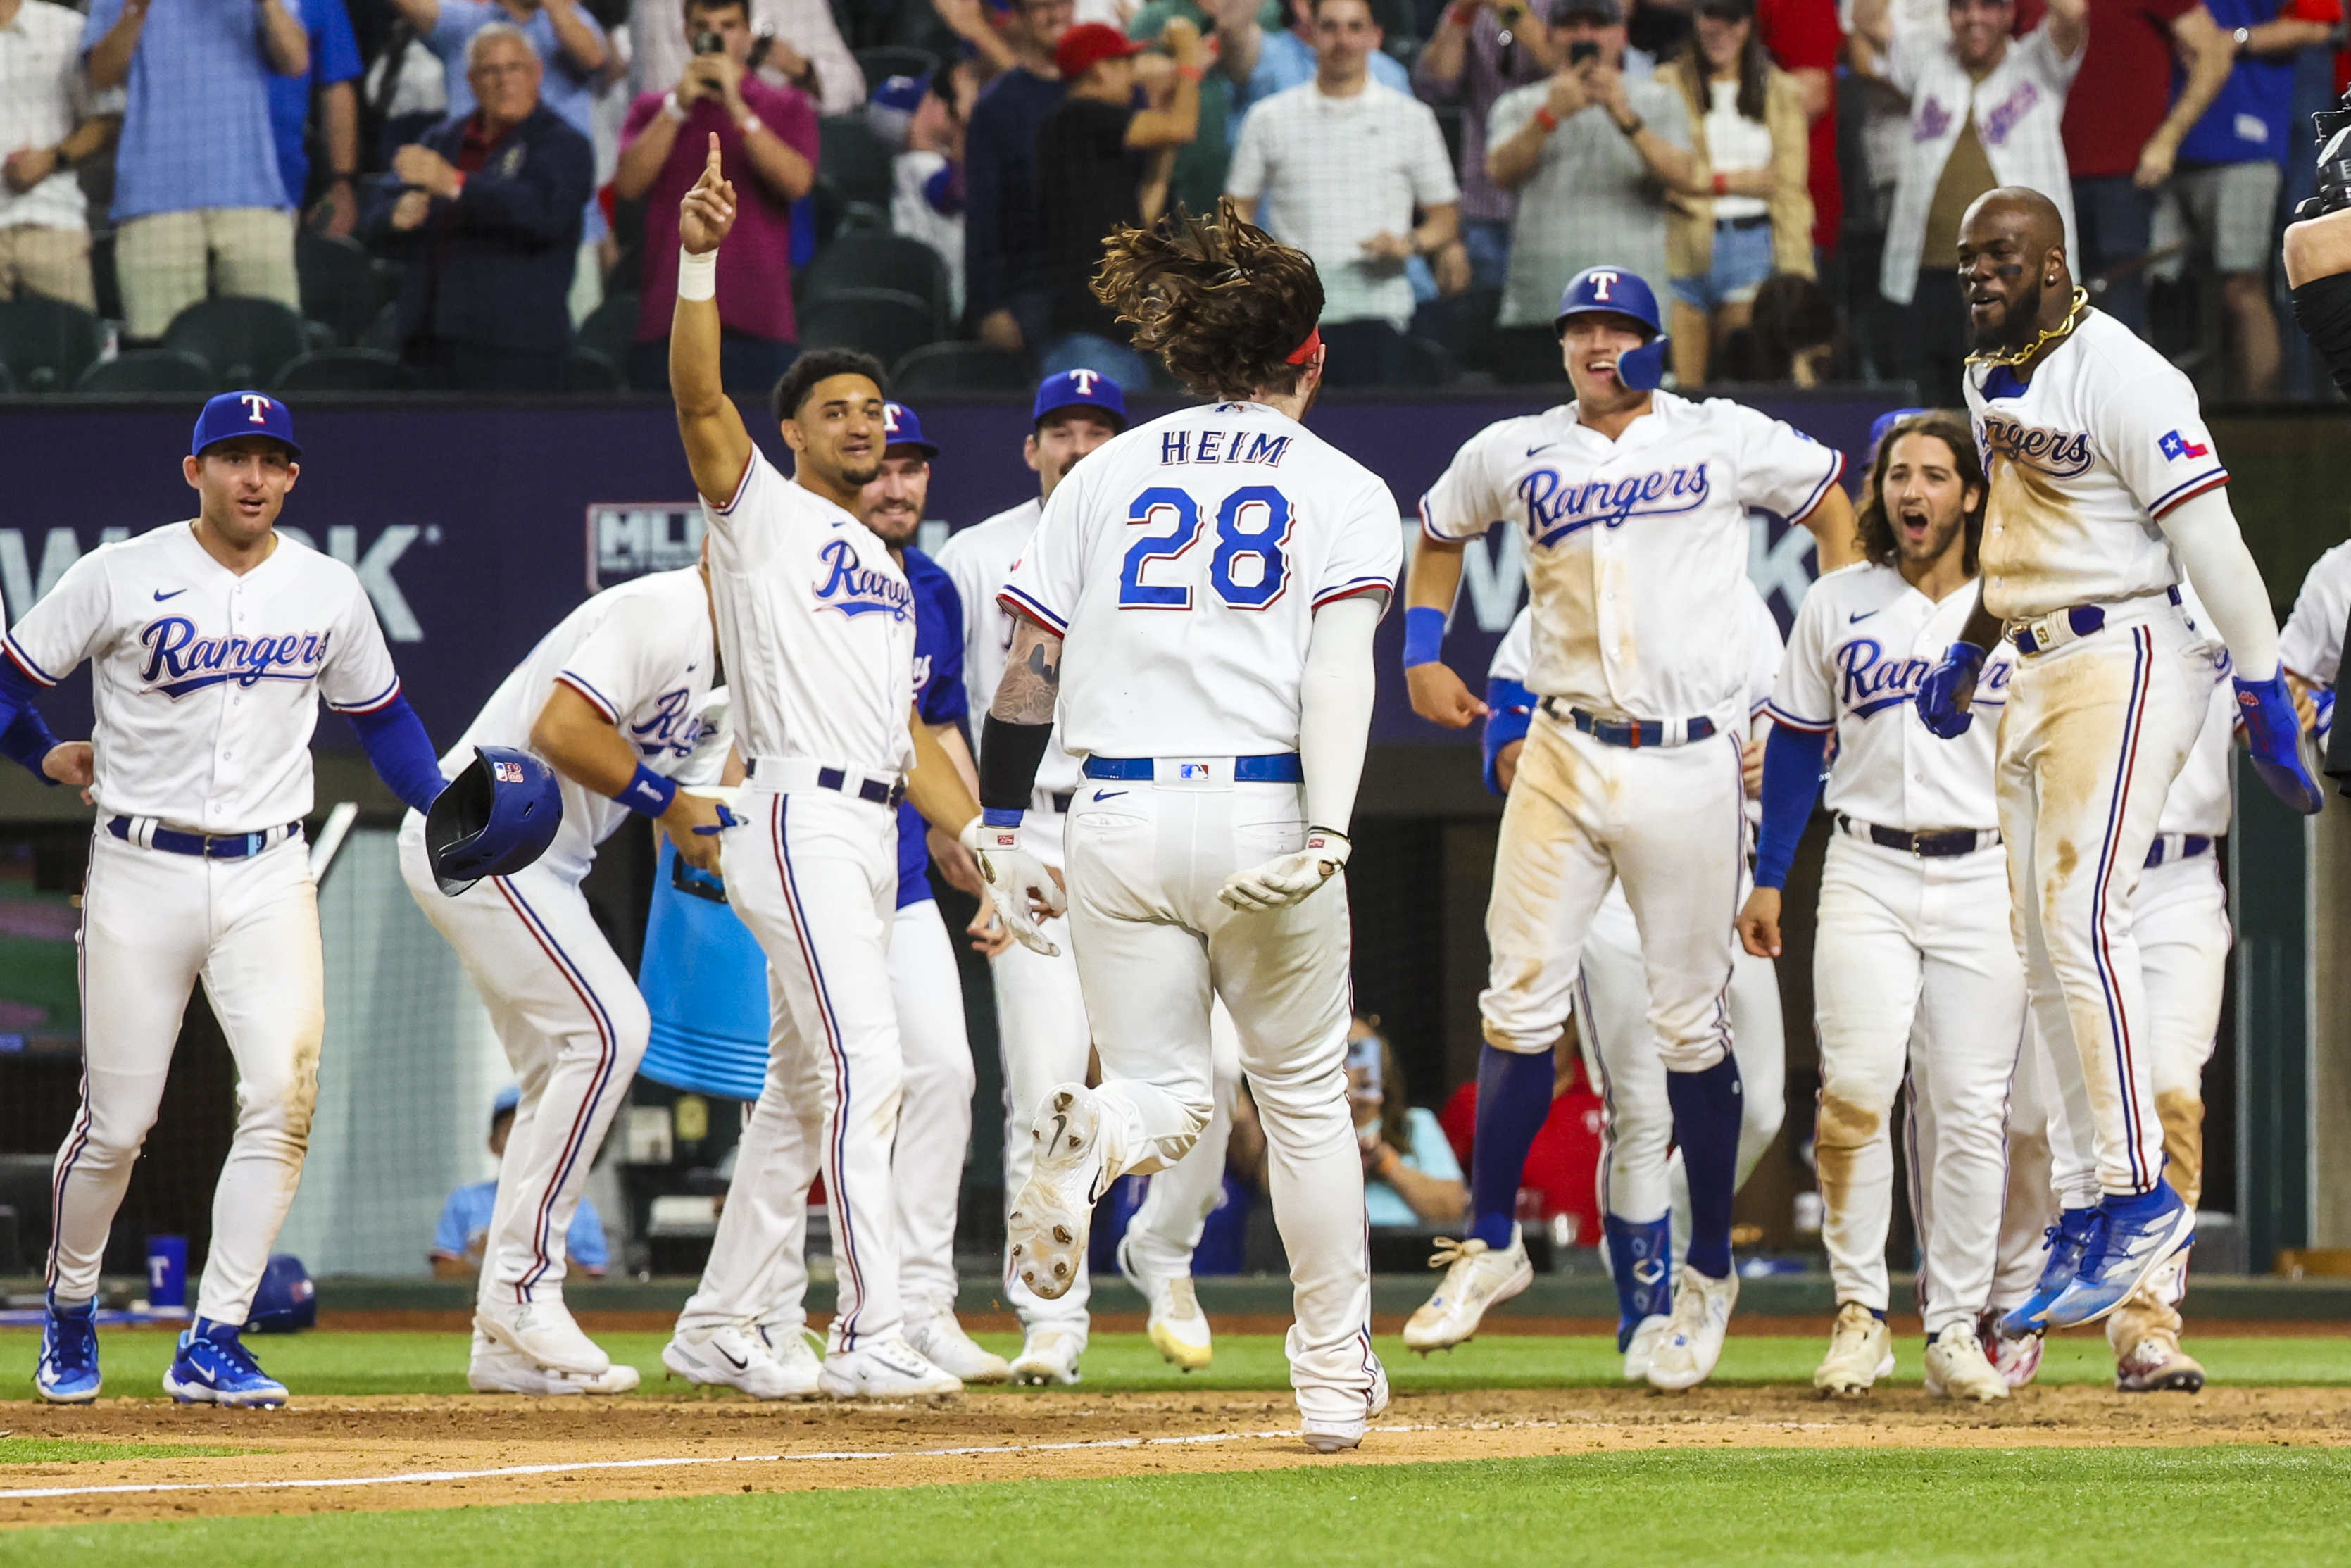 Texas Rangers catcher Jonah Heim celebrates with teammates after hitting a walk-off three-run home run during the tenth inning against the Kansas City Royals on April 11 at Globe Life Field.